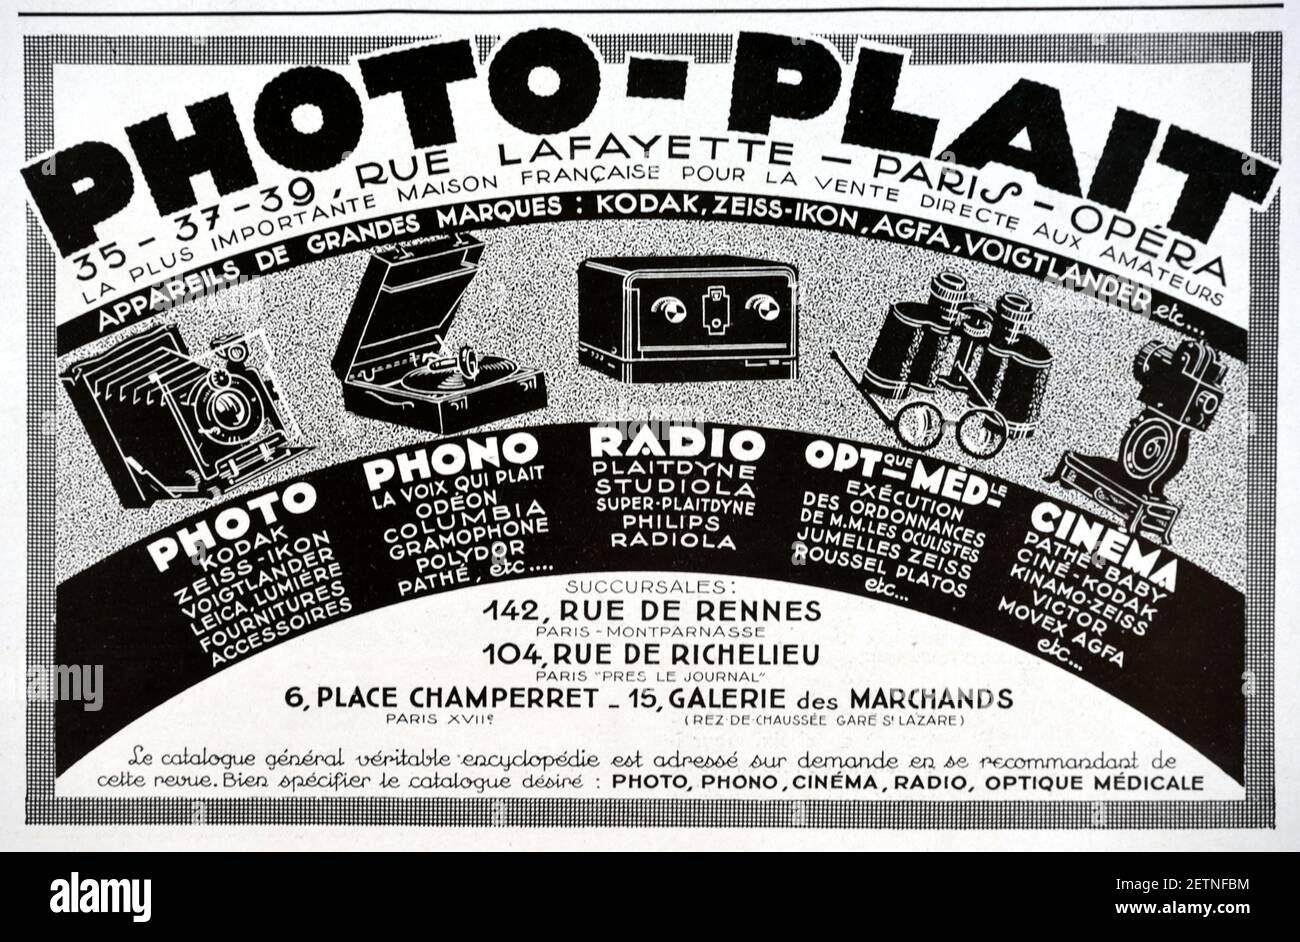 Vintage Advert, Advertisement or Publicity for Photographers Shop Photo-Plait Paris France 1931. The Illustration Shows an Early Bellows Folding Camera, a Record Player, Radio, Eye Glasses, Binoculars and Movie Camera. Stock Photo